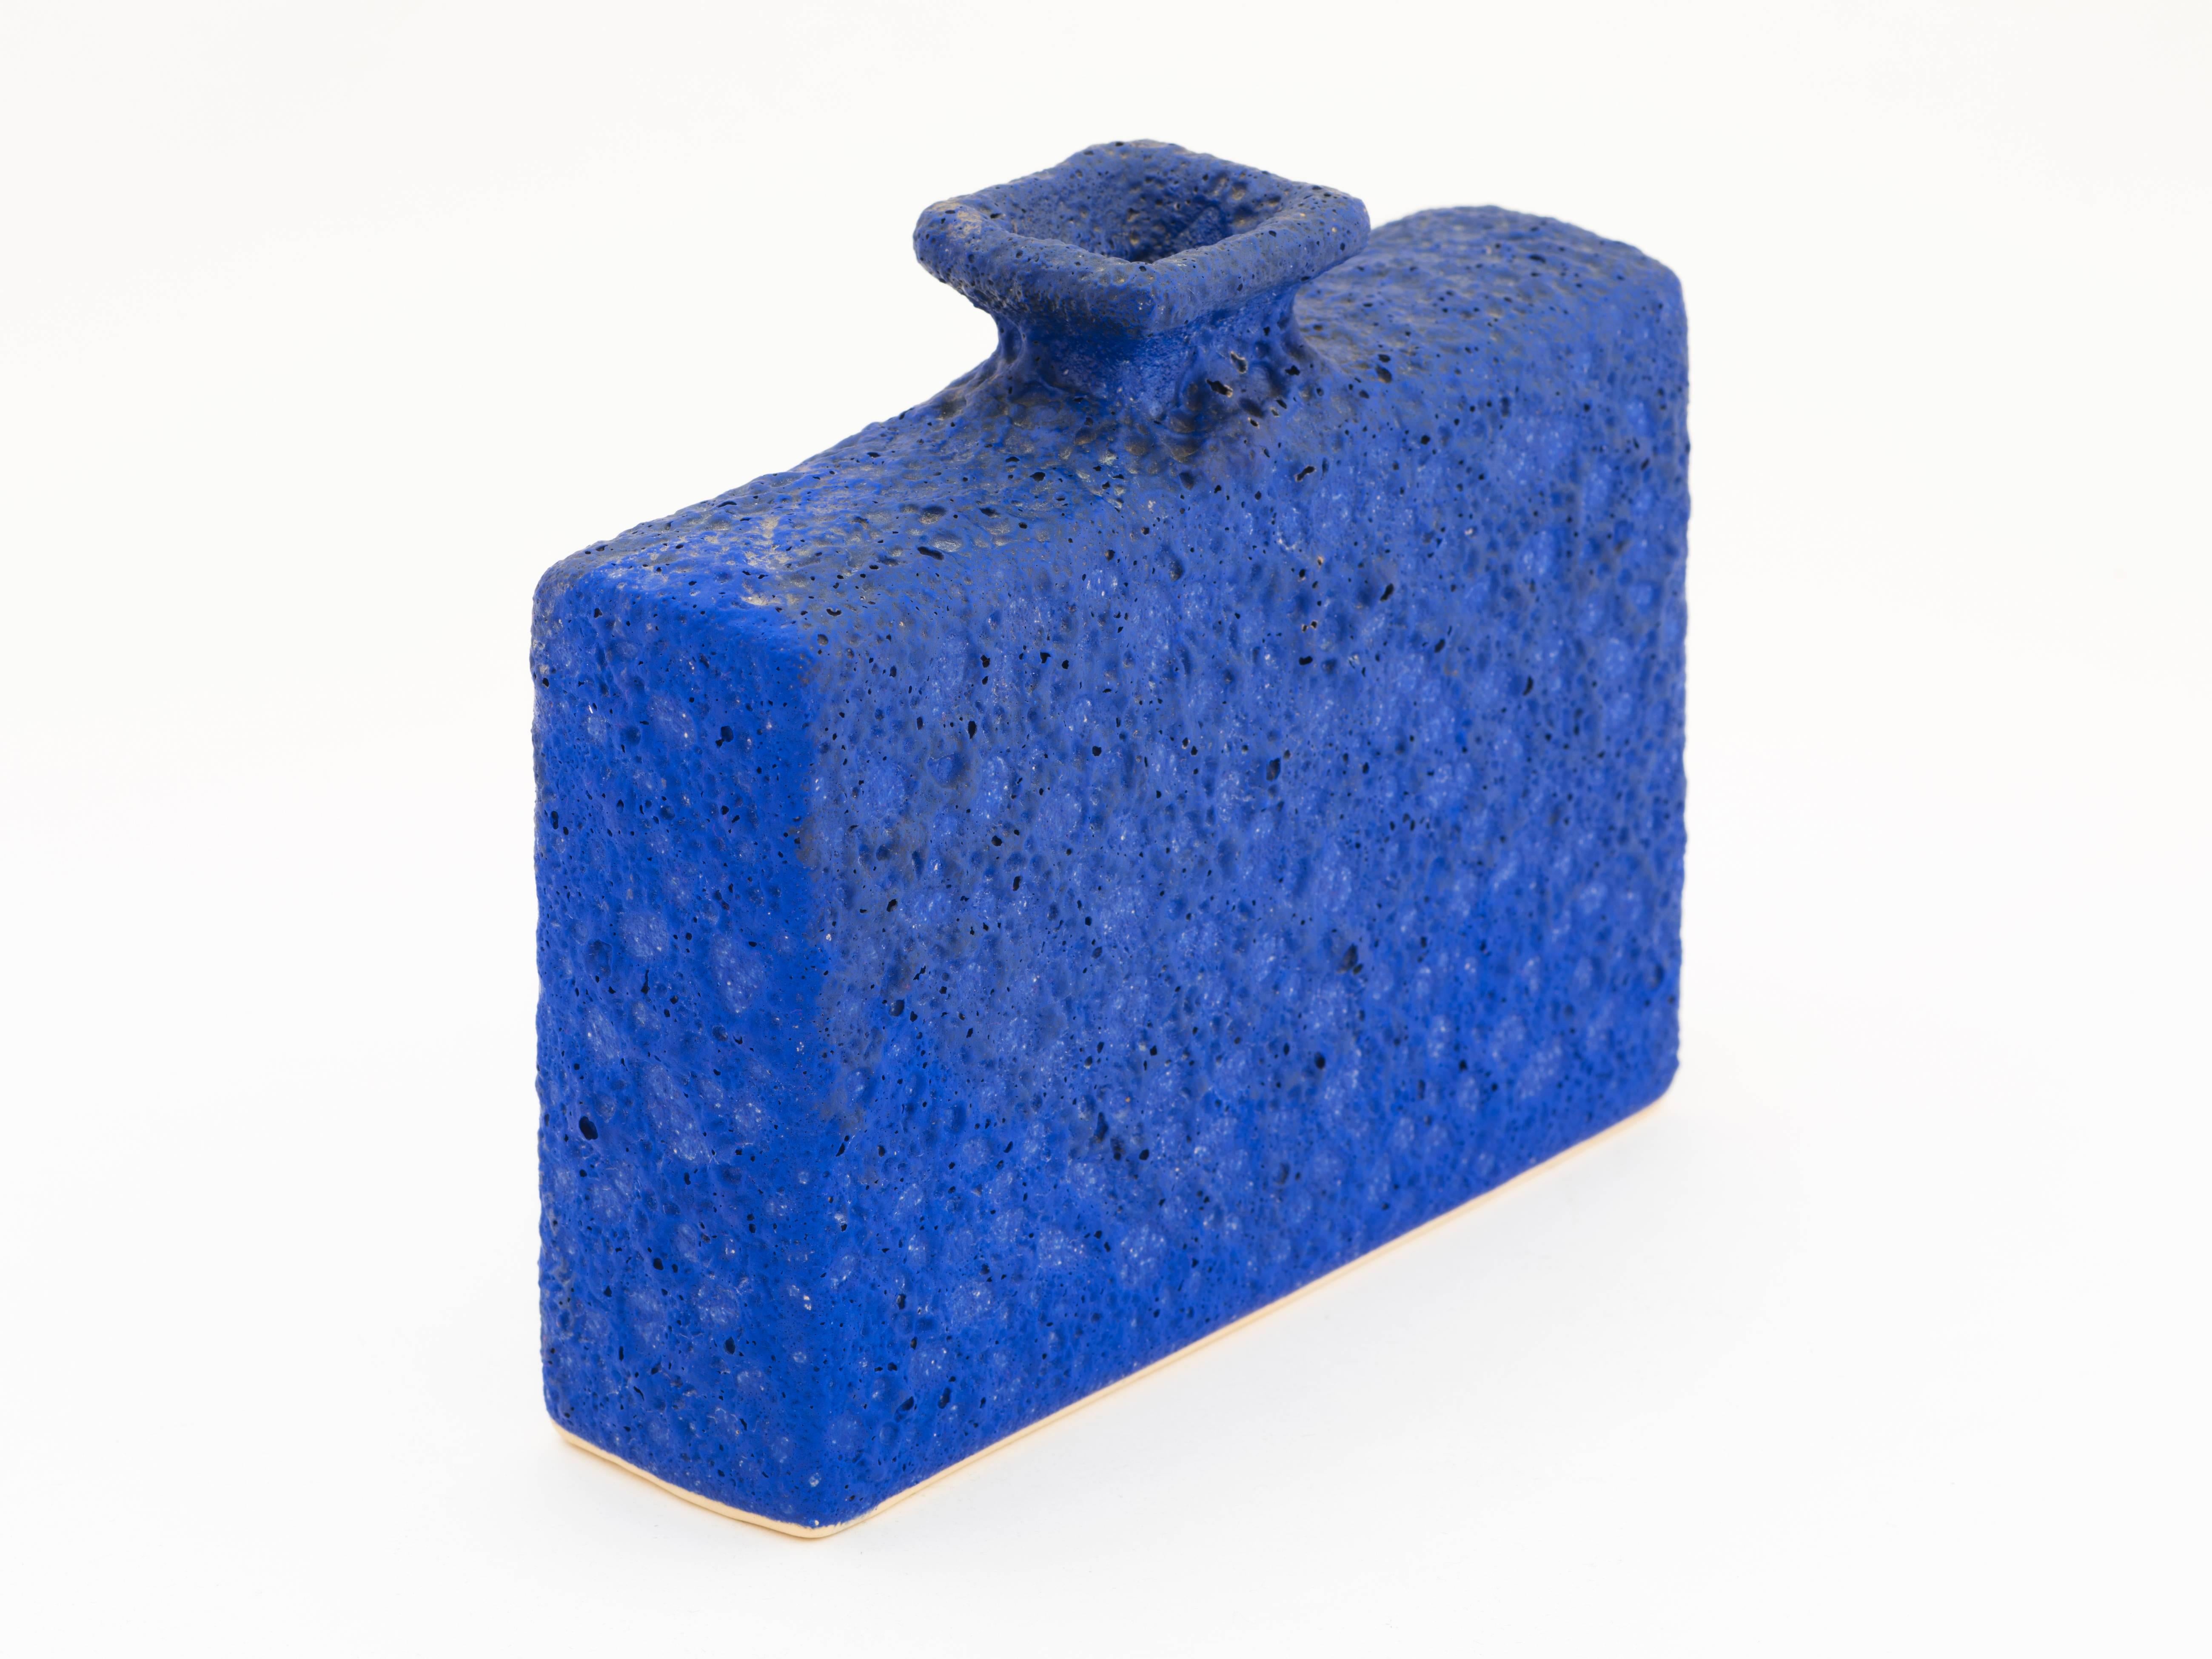 A strikingly simple and heavily glazed ceramic vessel in a slab form with a stout lip produced by Silberdistel, circa 1965. The volcanic glaze is a nearly perfect shade of International Klein Blue and its pockmarked texture over the spare,